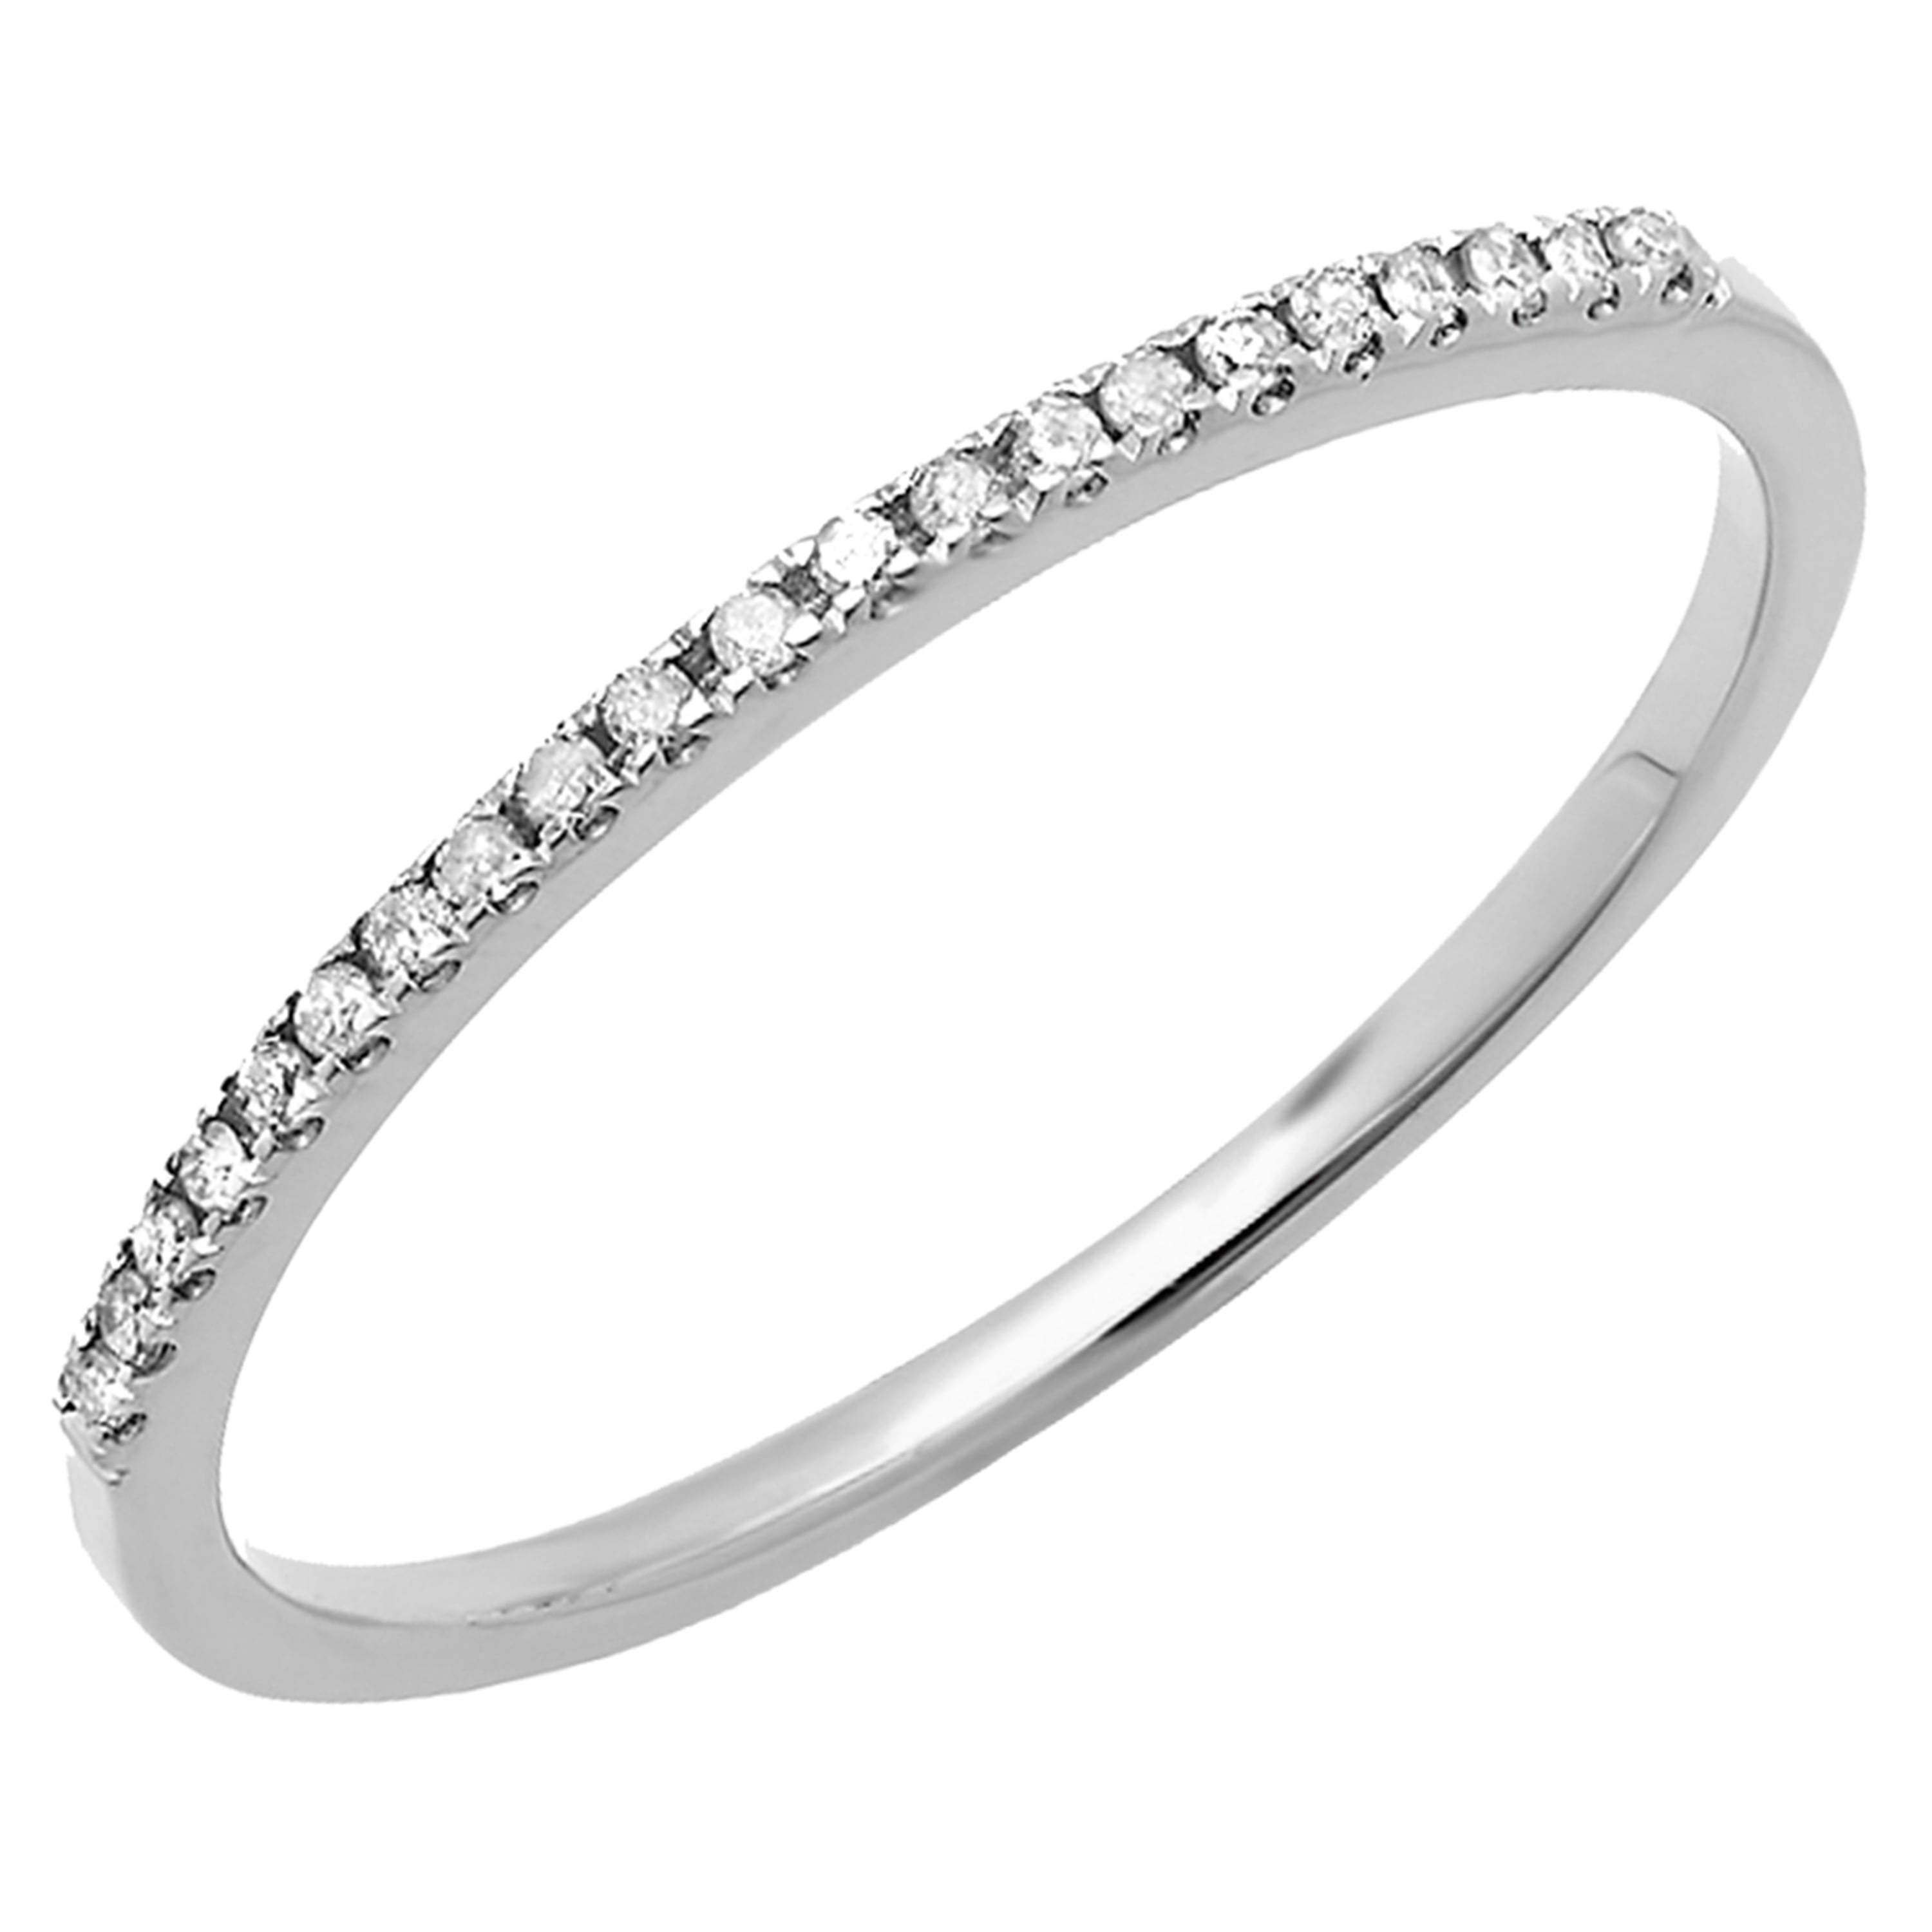 0.08 Carat 18k White Gold Diamond Dainty Anniversary Band Stackable Ring Size 8 